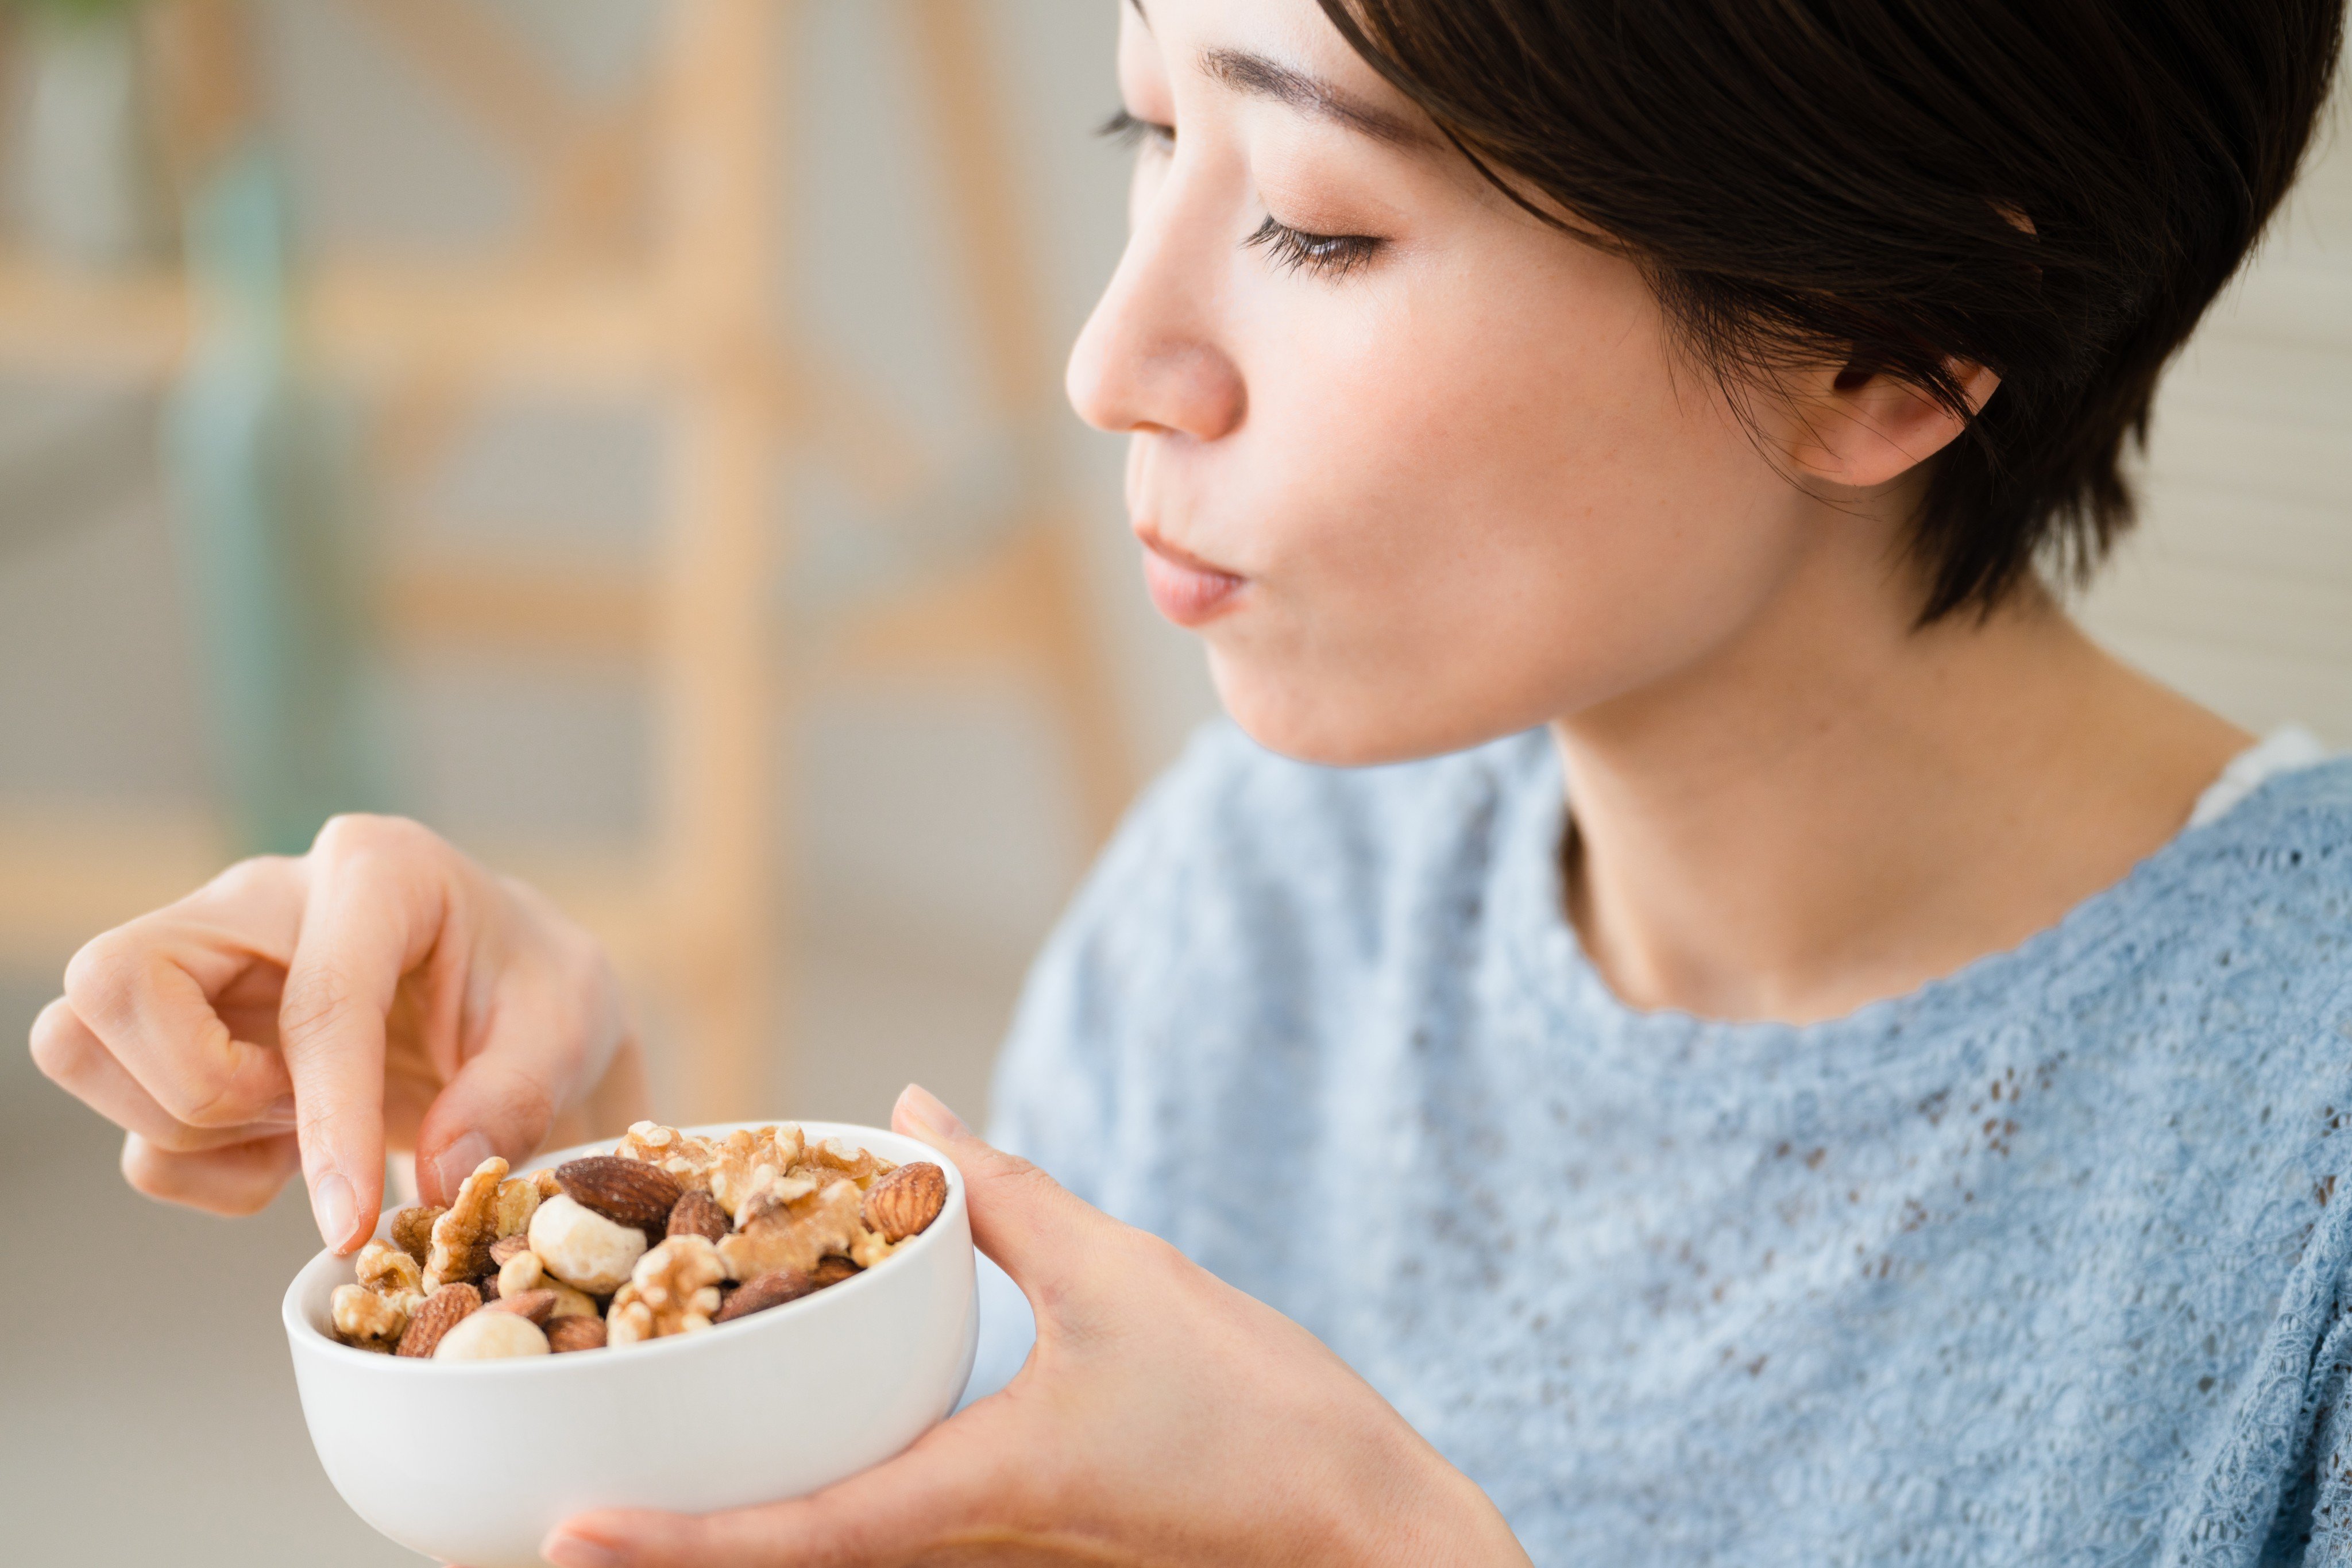 Nuts and seeds are very good for us, and can contribute to weight loss. With the help of a nutritionist, we look at the health benefits of these protein-rich snacks, and how to eat them. Photo: Shutterstock 